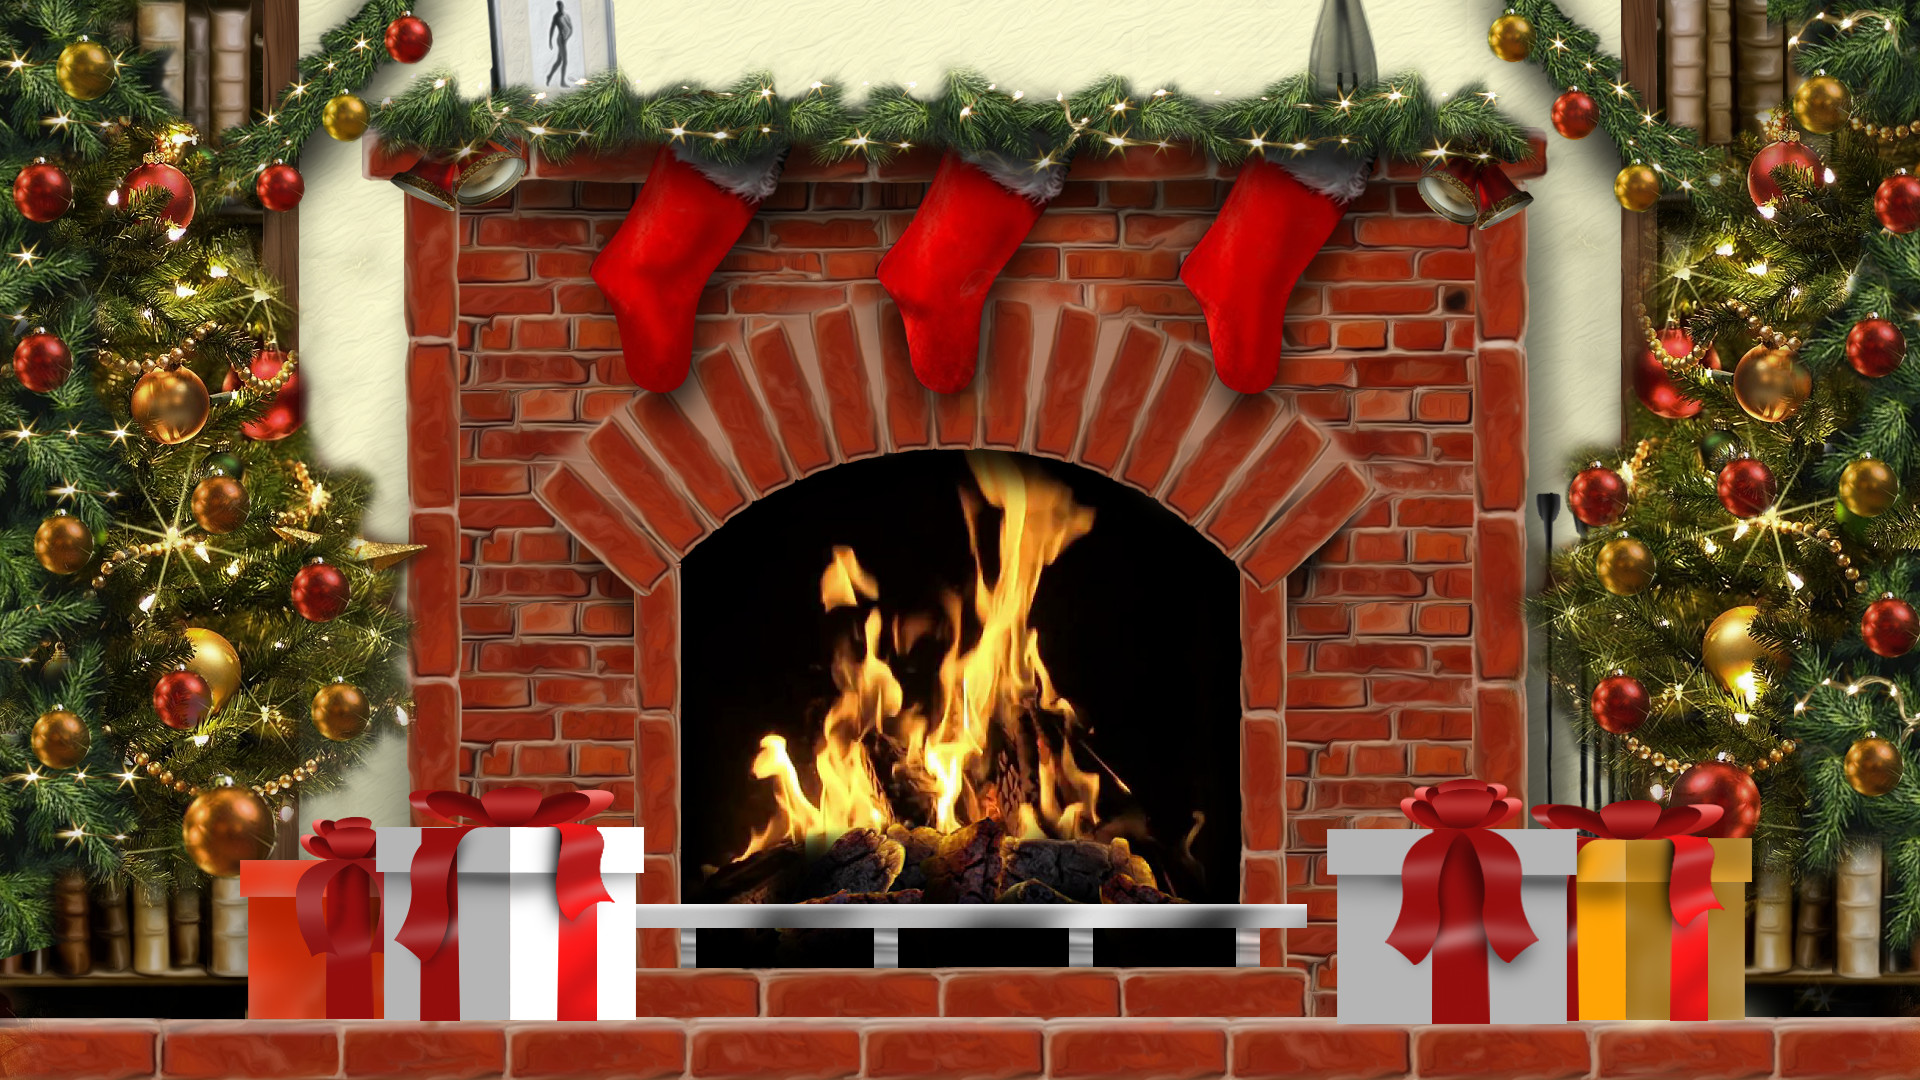 Christmas Fireplace Photo
 Amazing Christmas Fireplaces App Ranking and Store Data